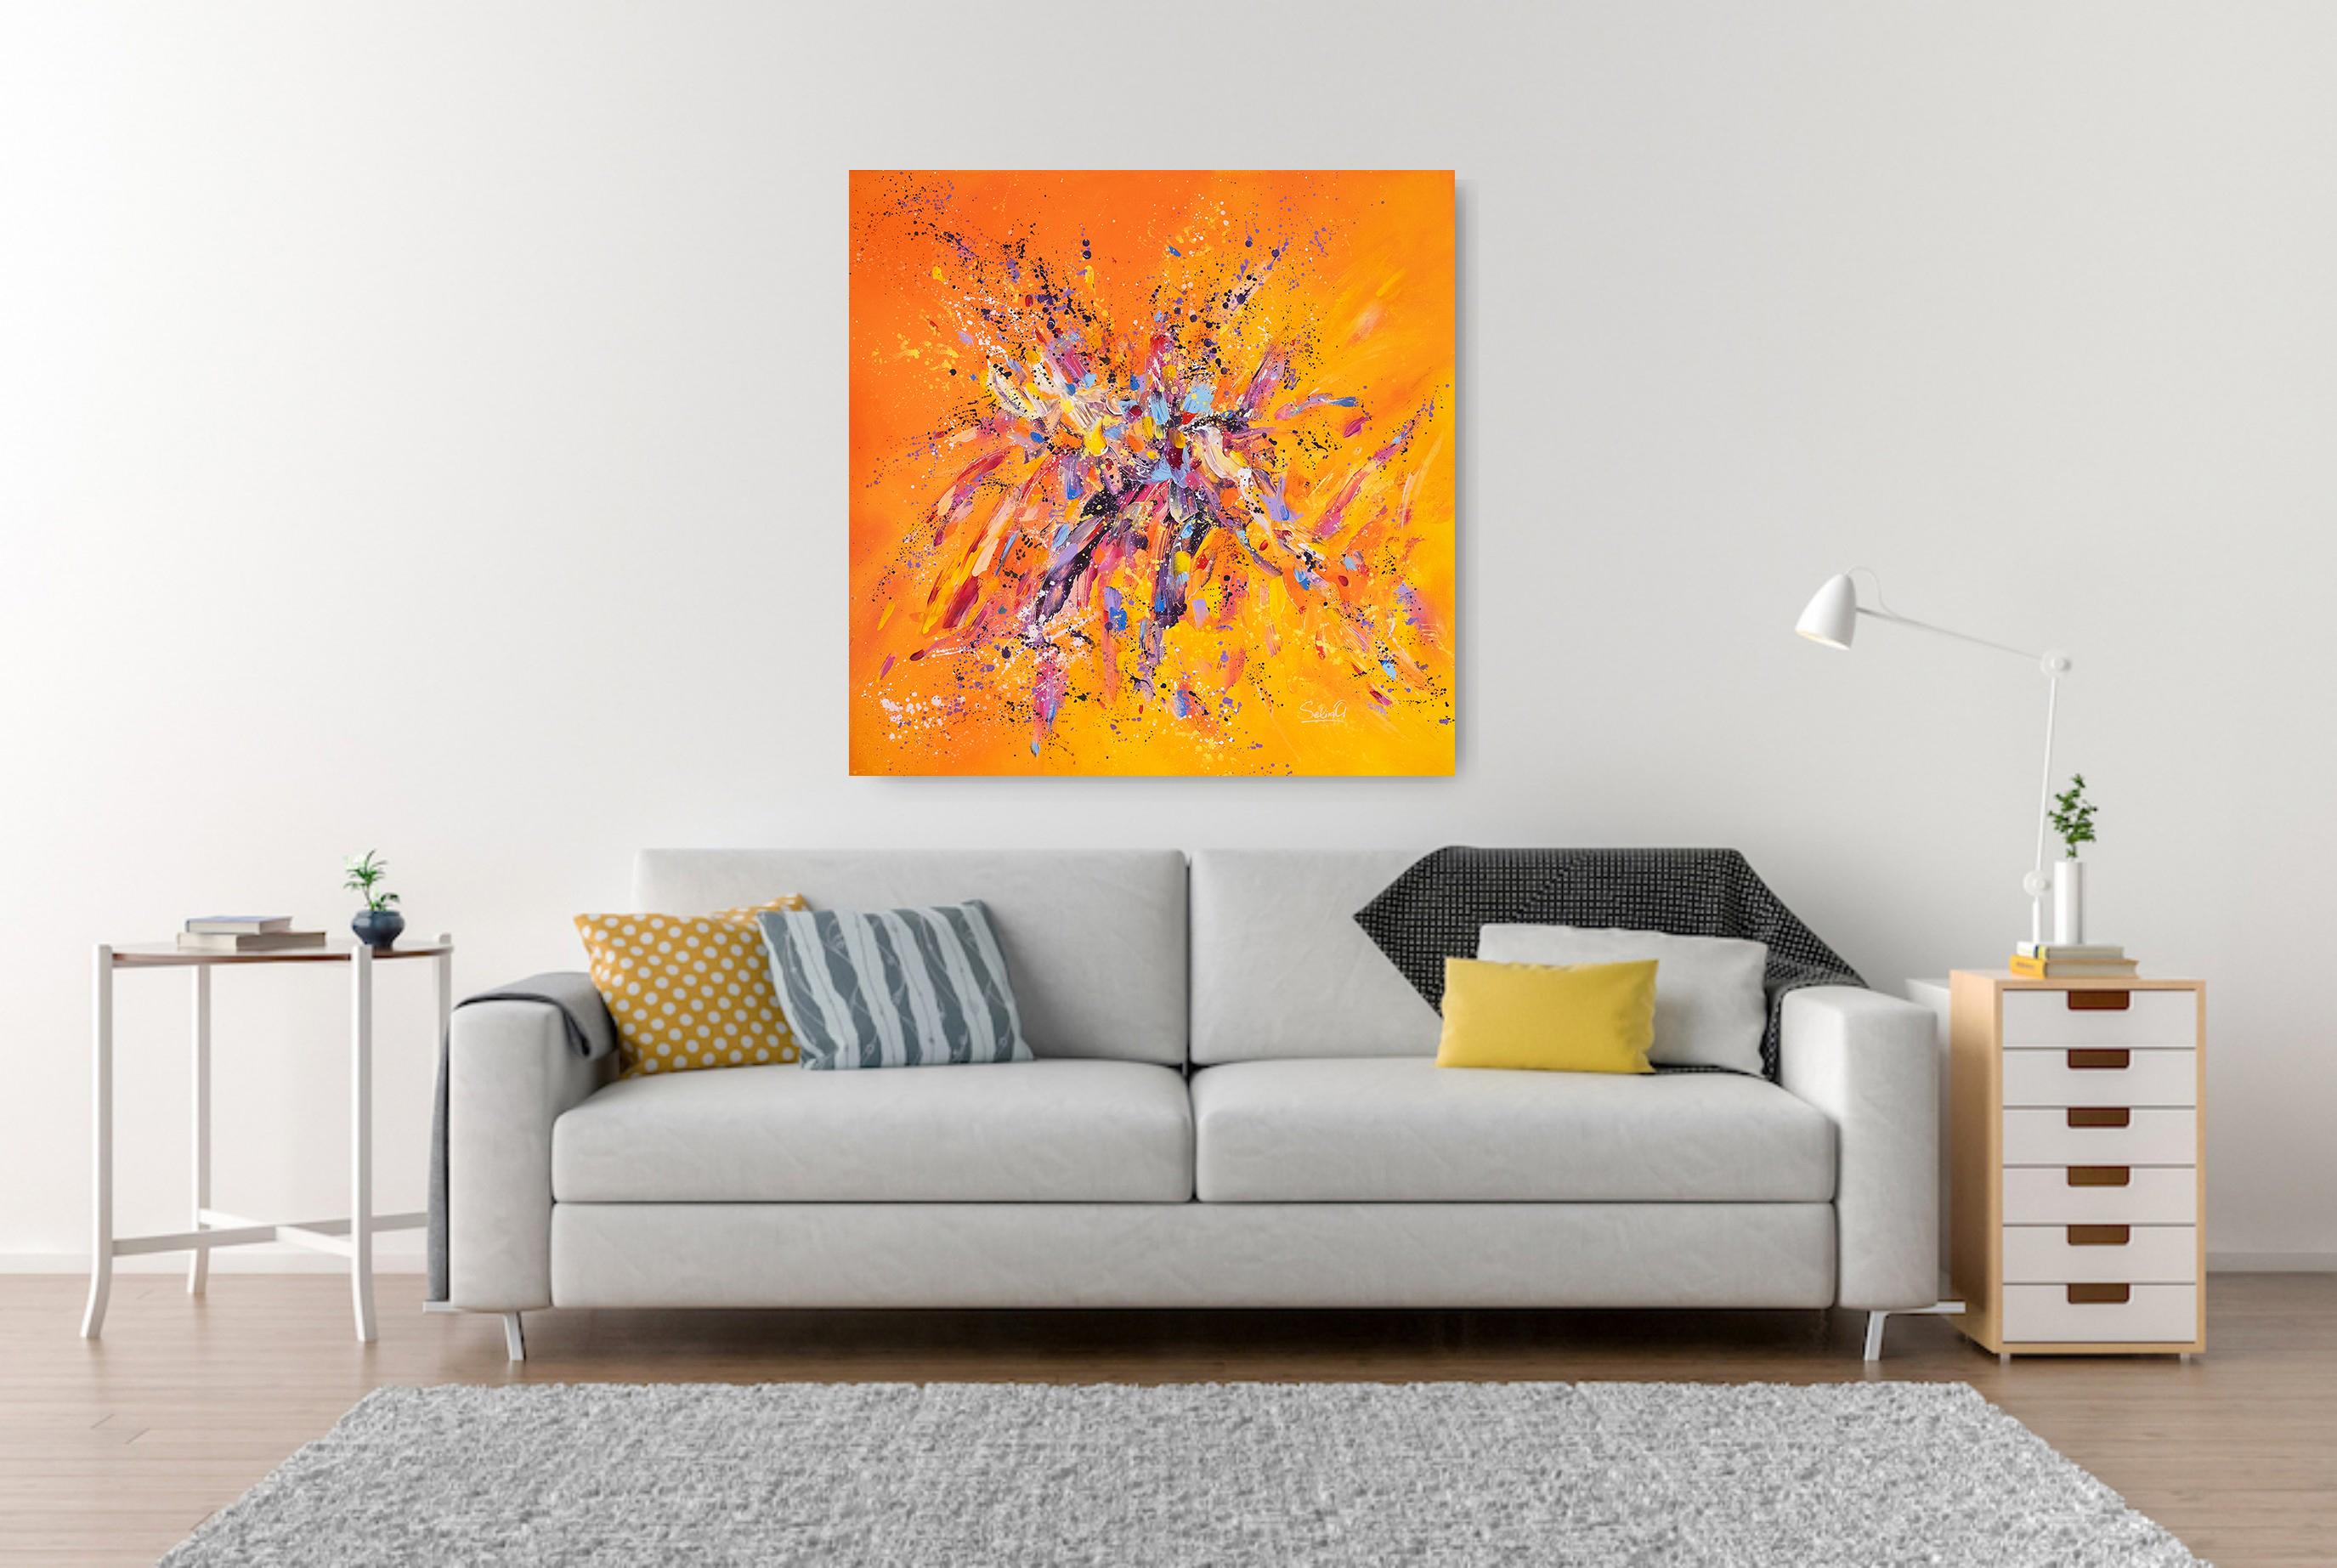 Orange joy, Modern Colorful Abstract Painting 100x100cm by Anna Selina For Sale 4